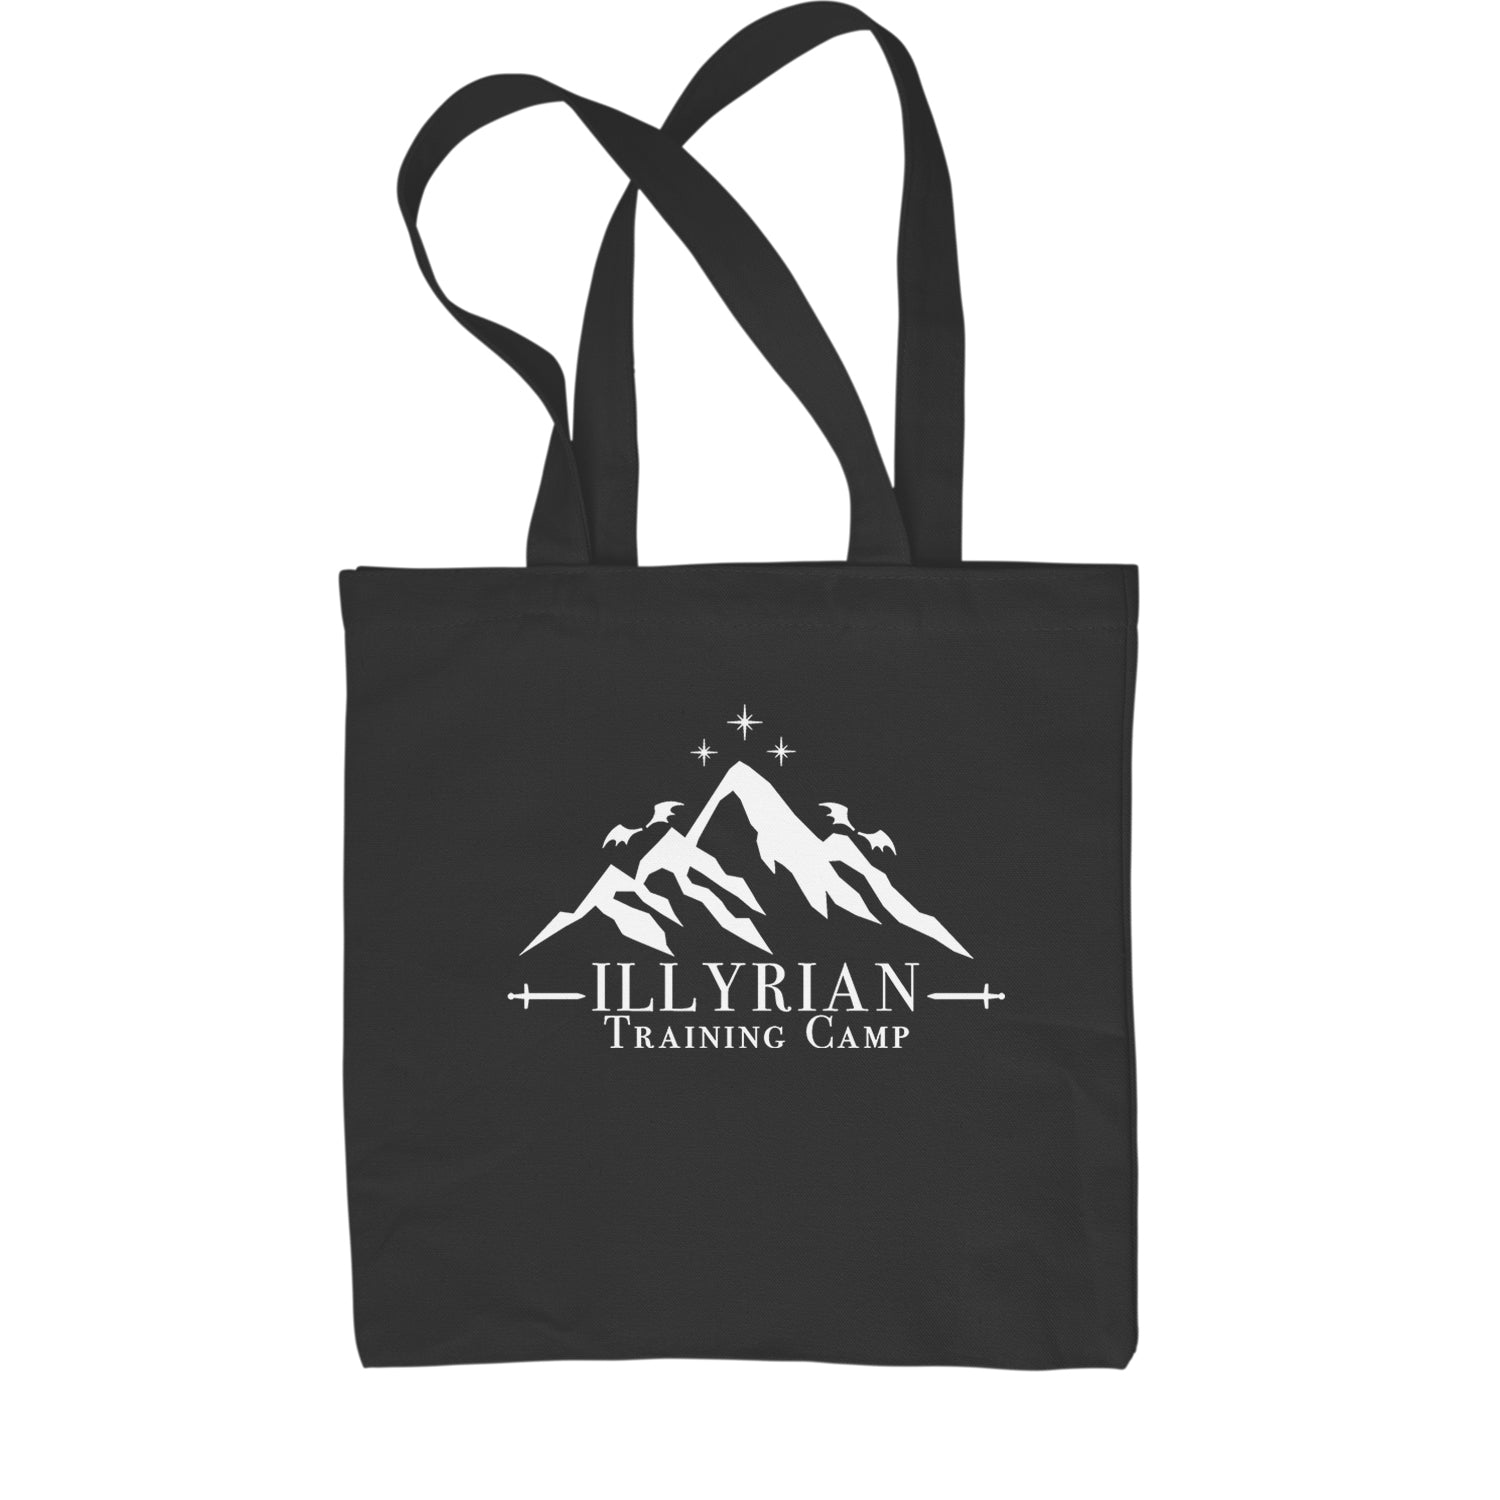 Illyrian Training Camp Night Court Shopping Tote Bag